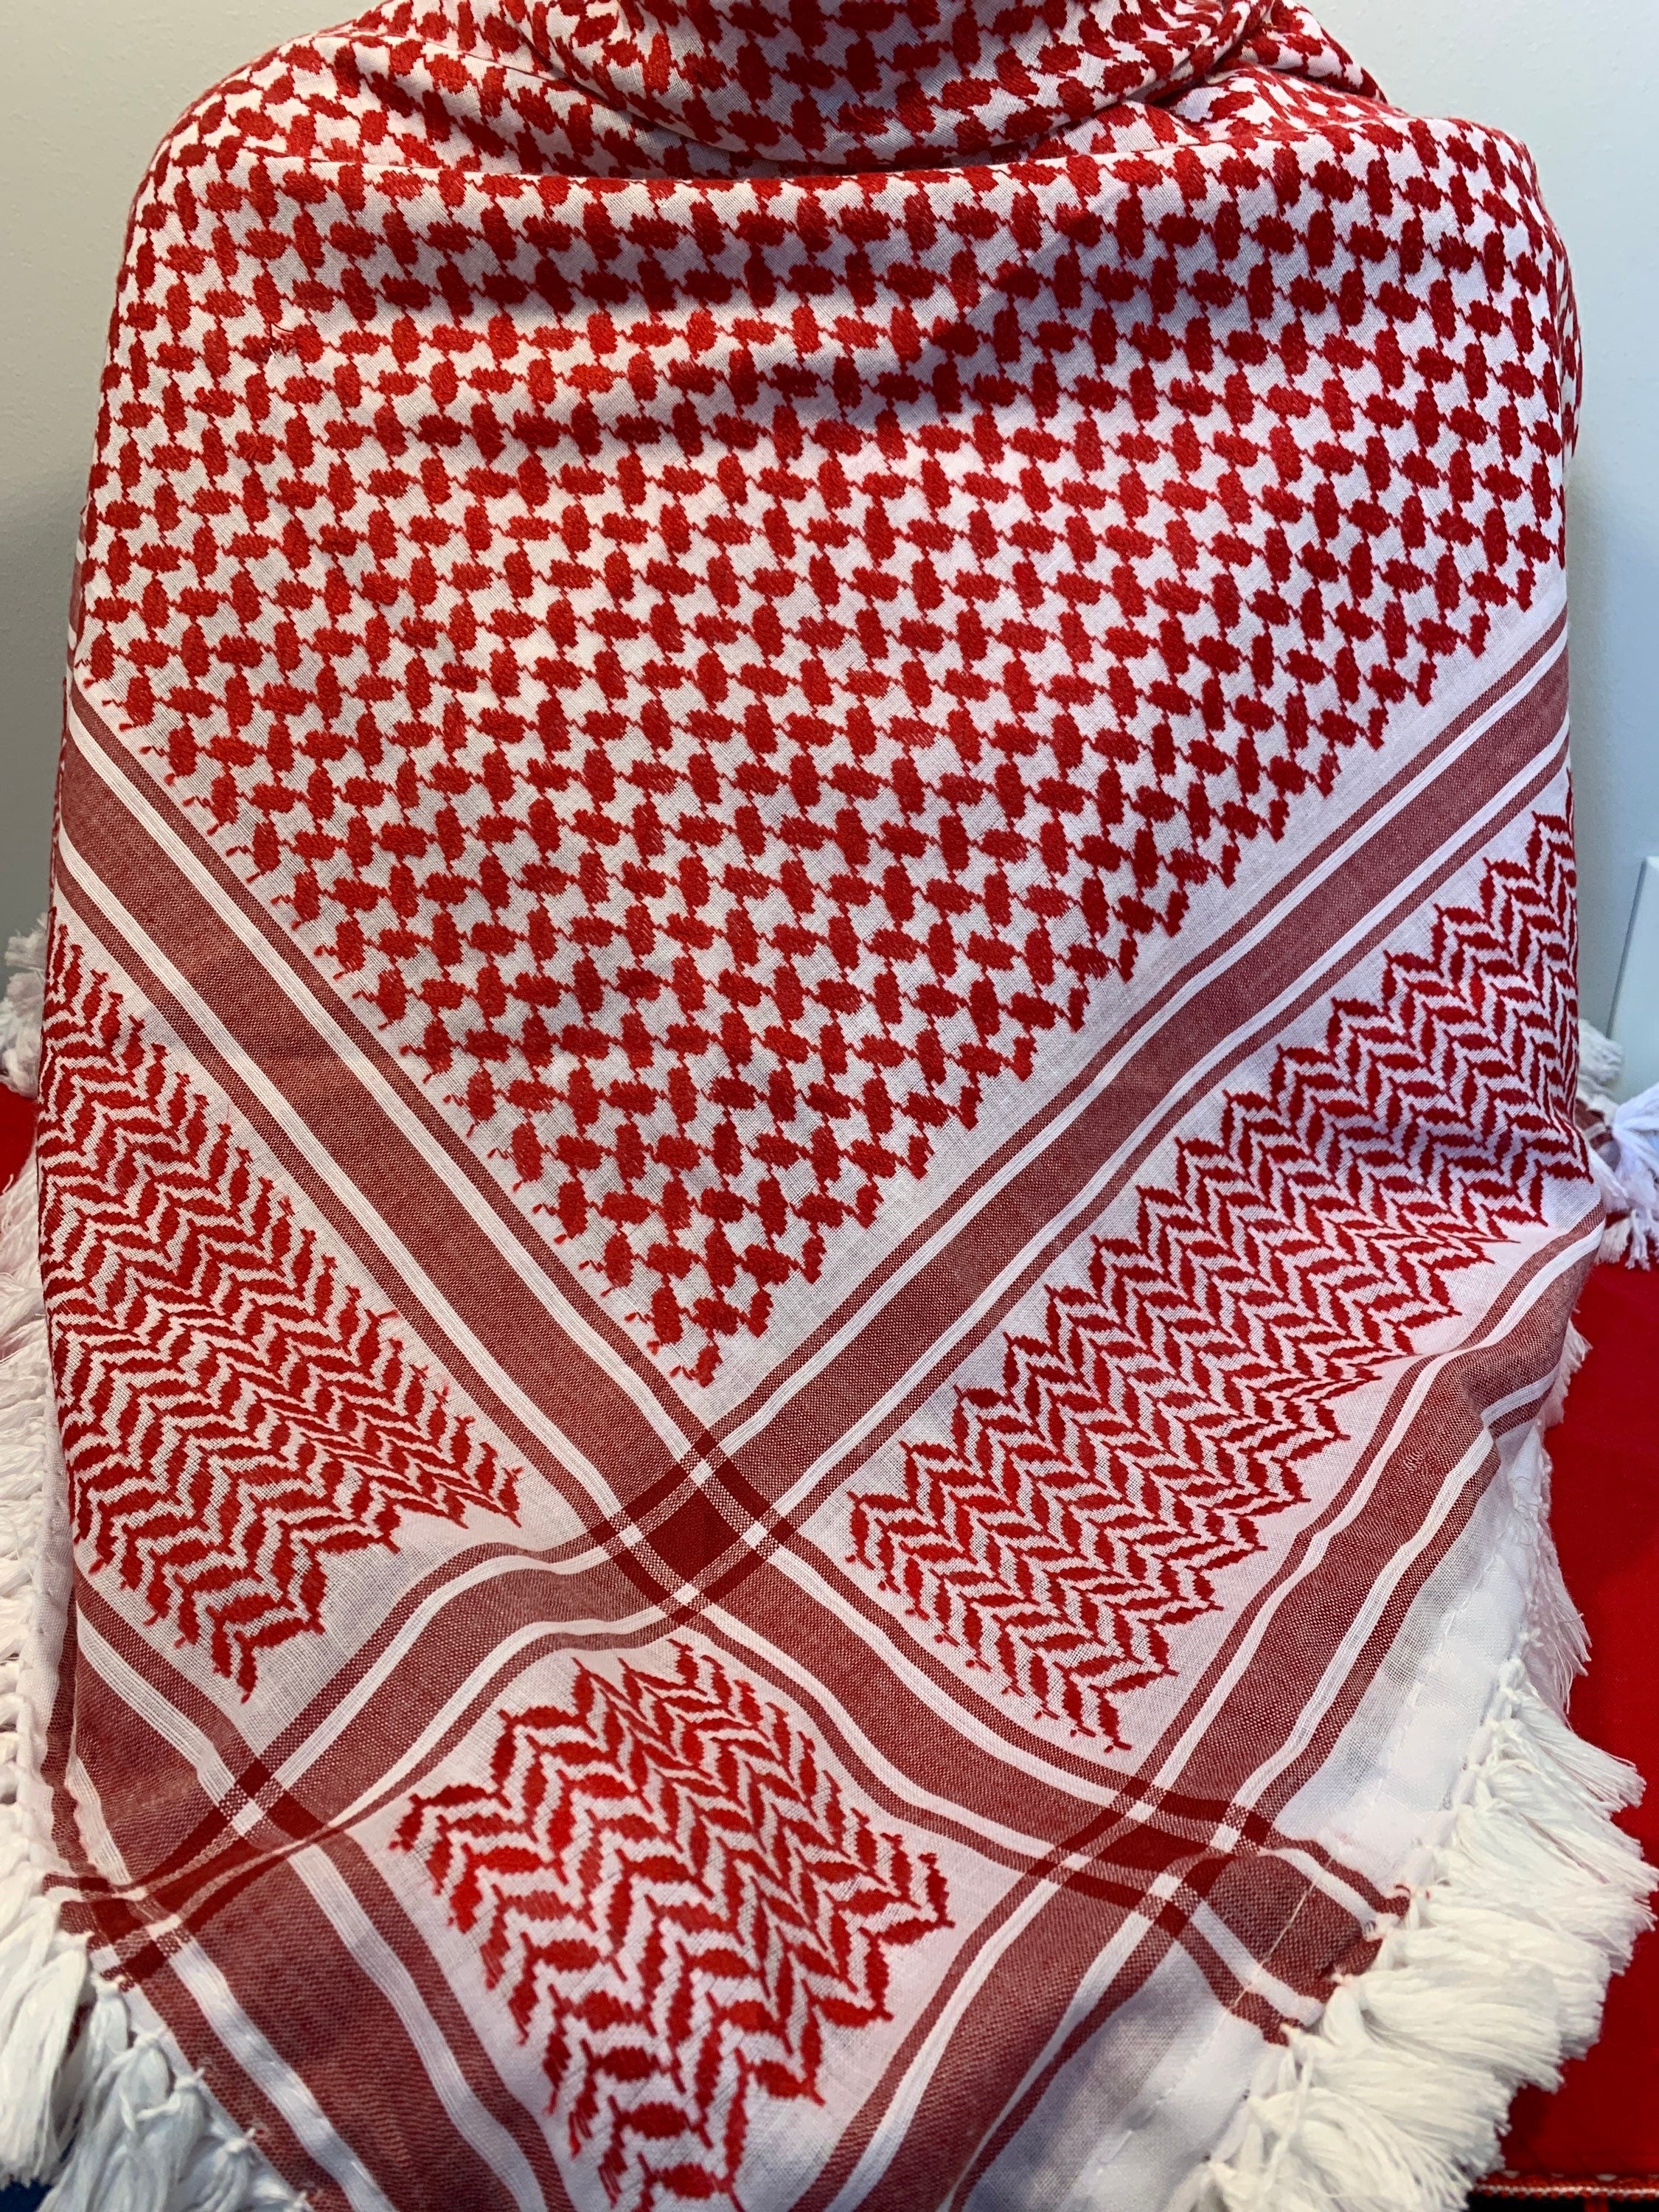 Shemagh Hand-Tied in Jordan Tactical Scarf 50